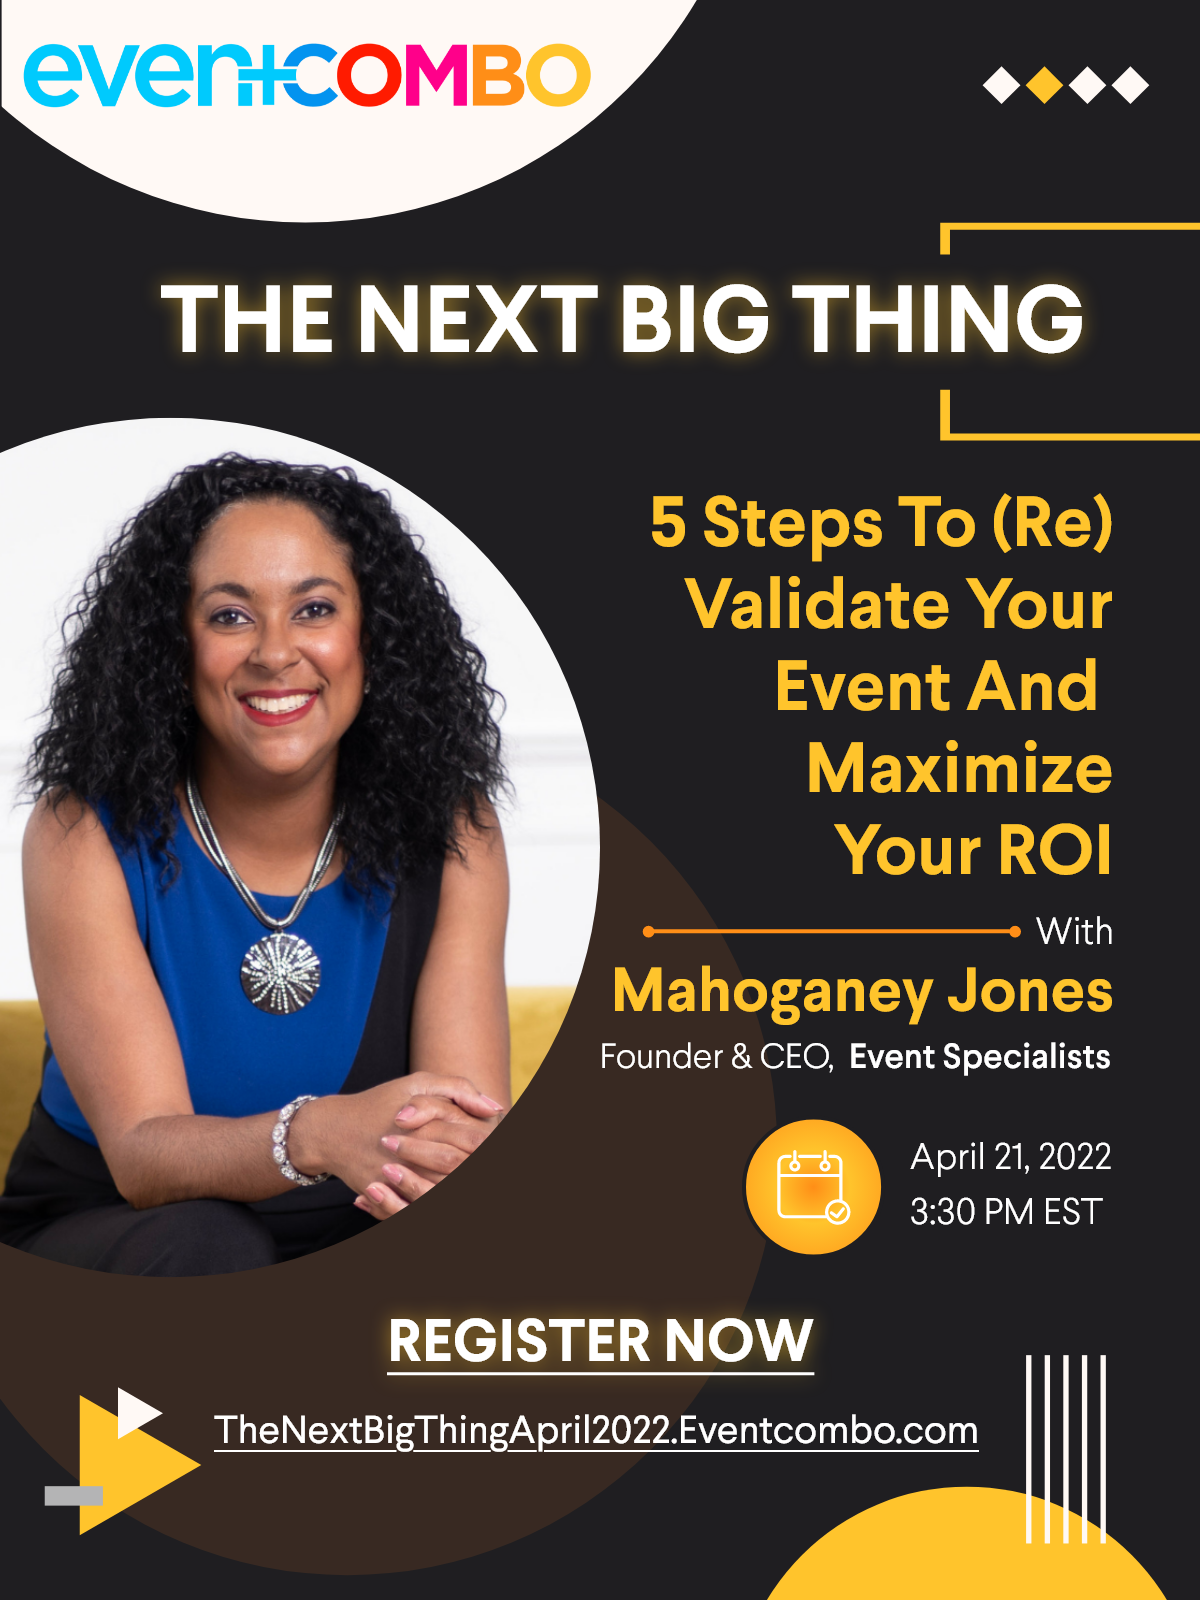 5 Steps to (Re) Validate Your Event and Maximize Your ROI with Mahoganey Jones. The Next Big Thing, a Webinar Series by Eventcombo